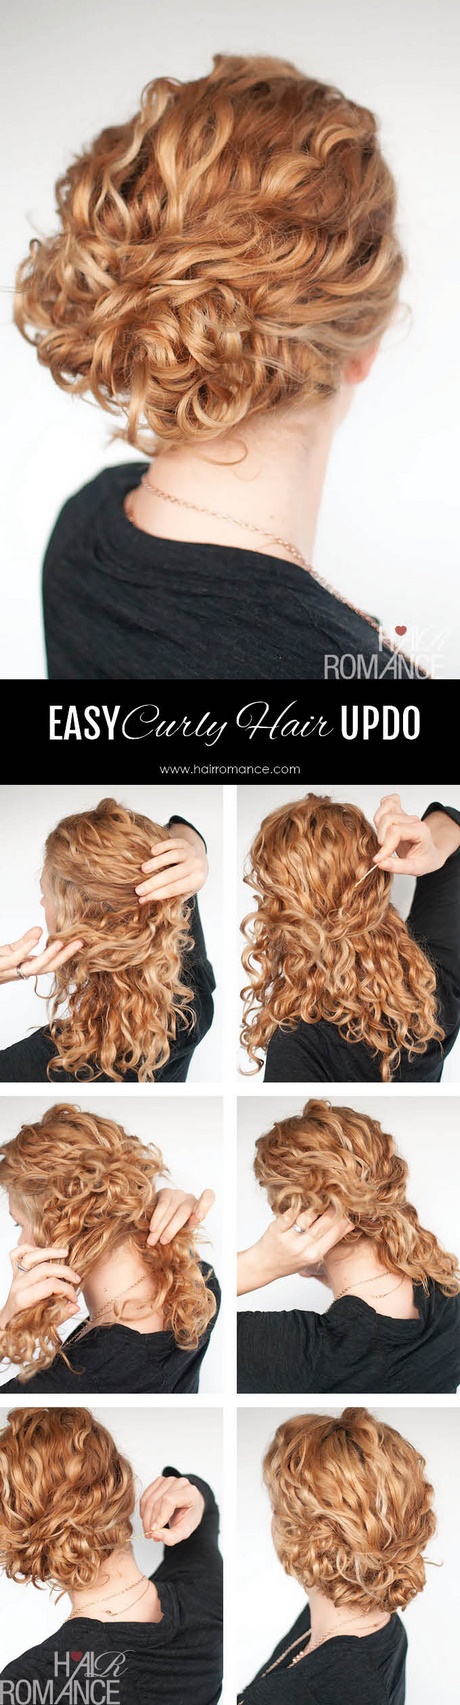 hair-updos-for-long-curly-hair-06_7 Hair updos for long curly hair